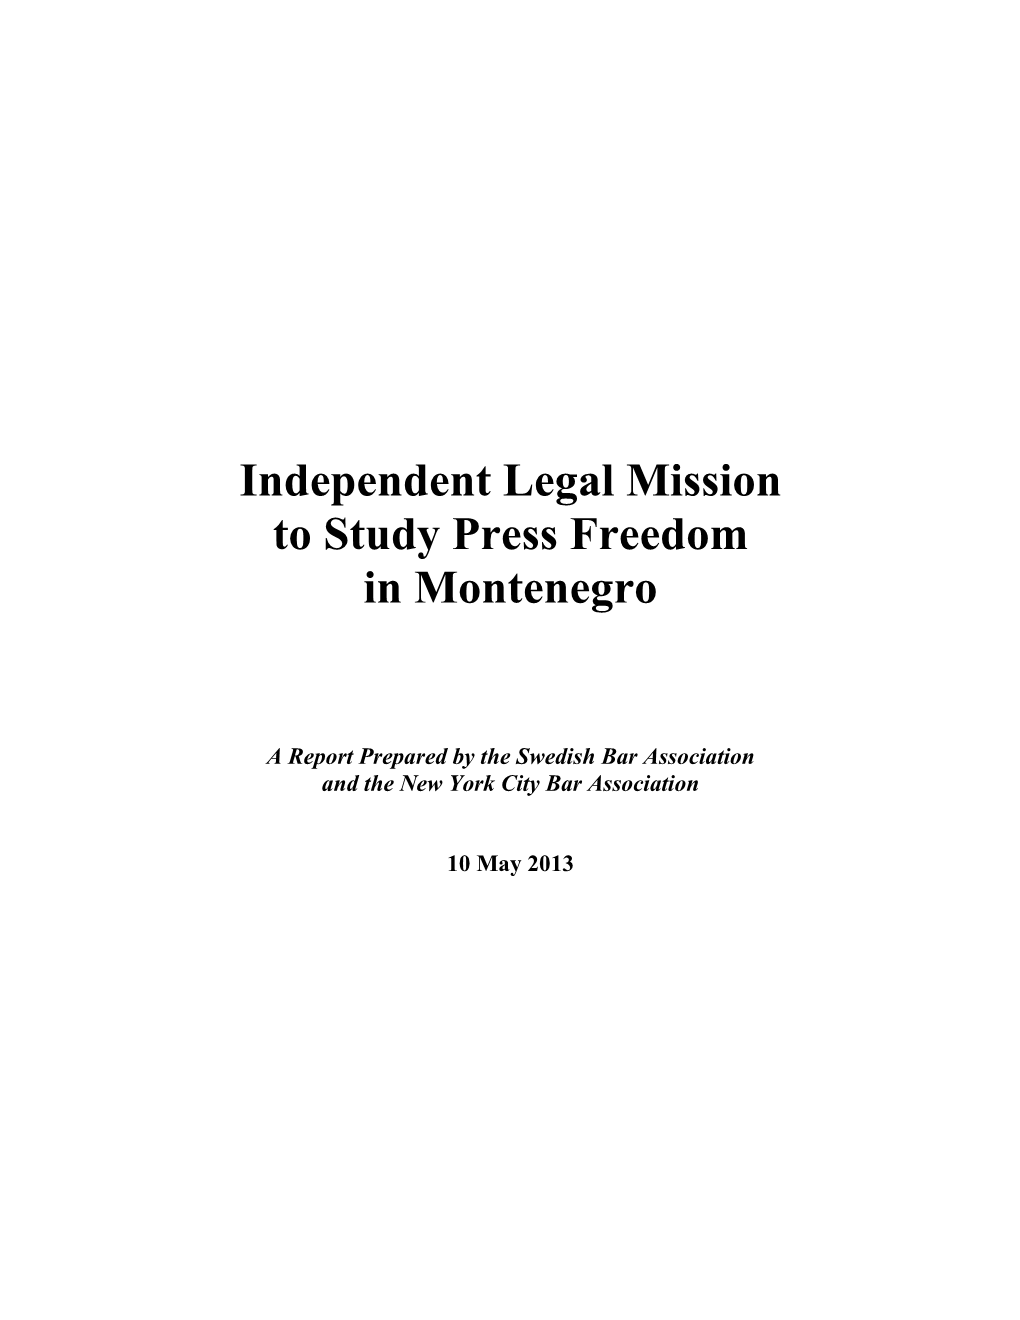 Independent Legal Mission to Study Press Freedom in Montenegro